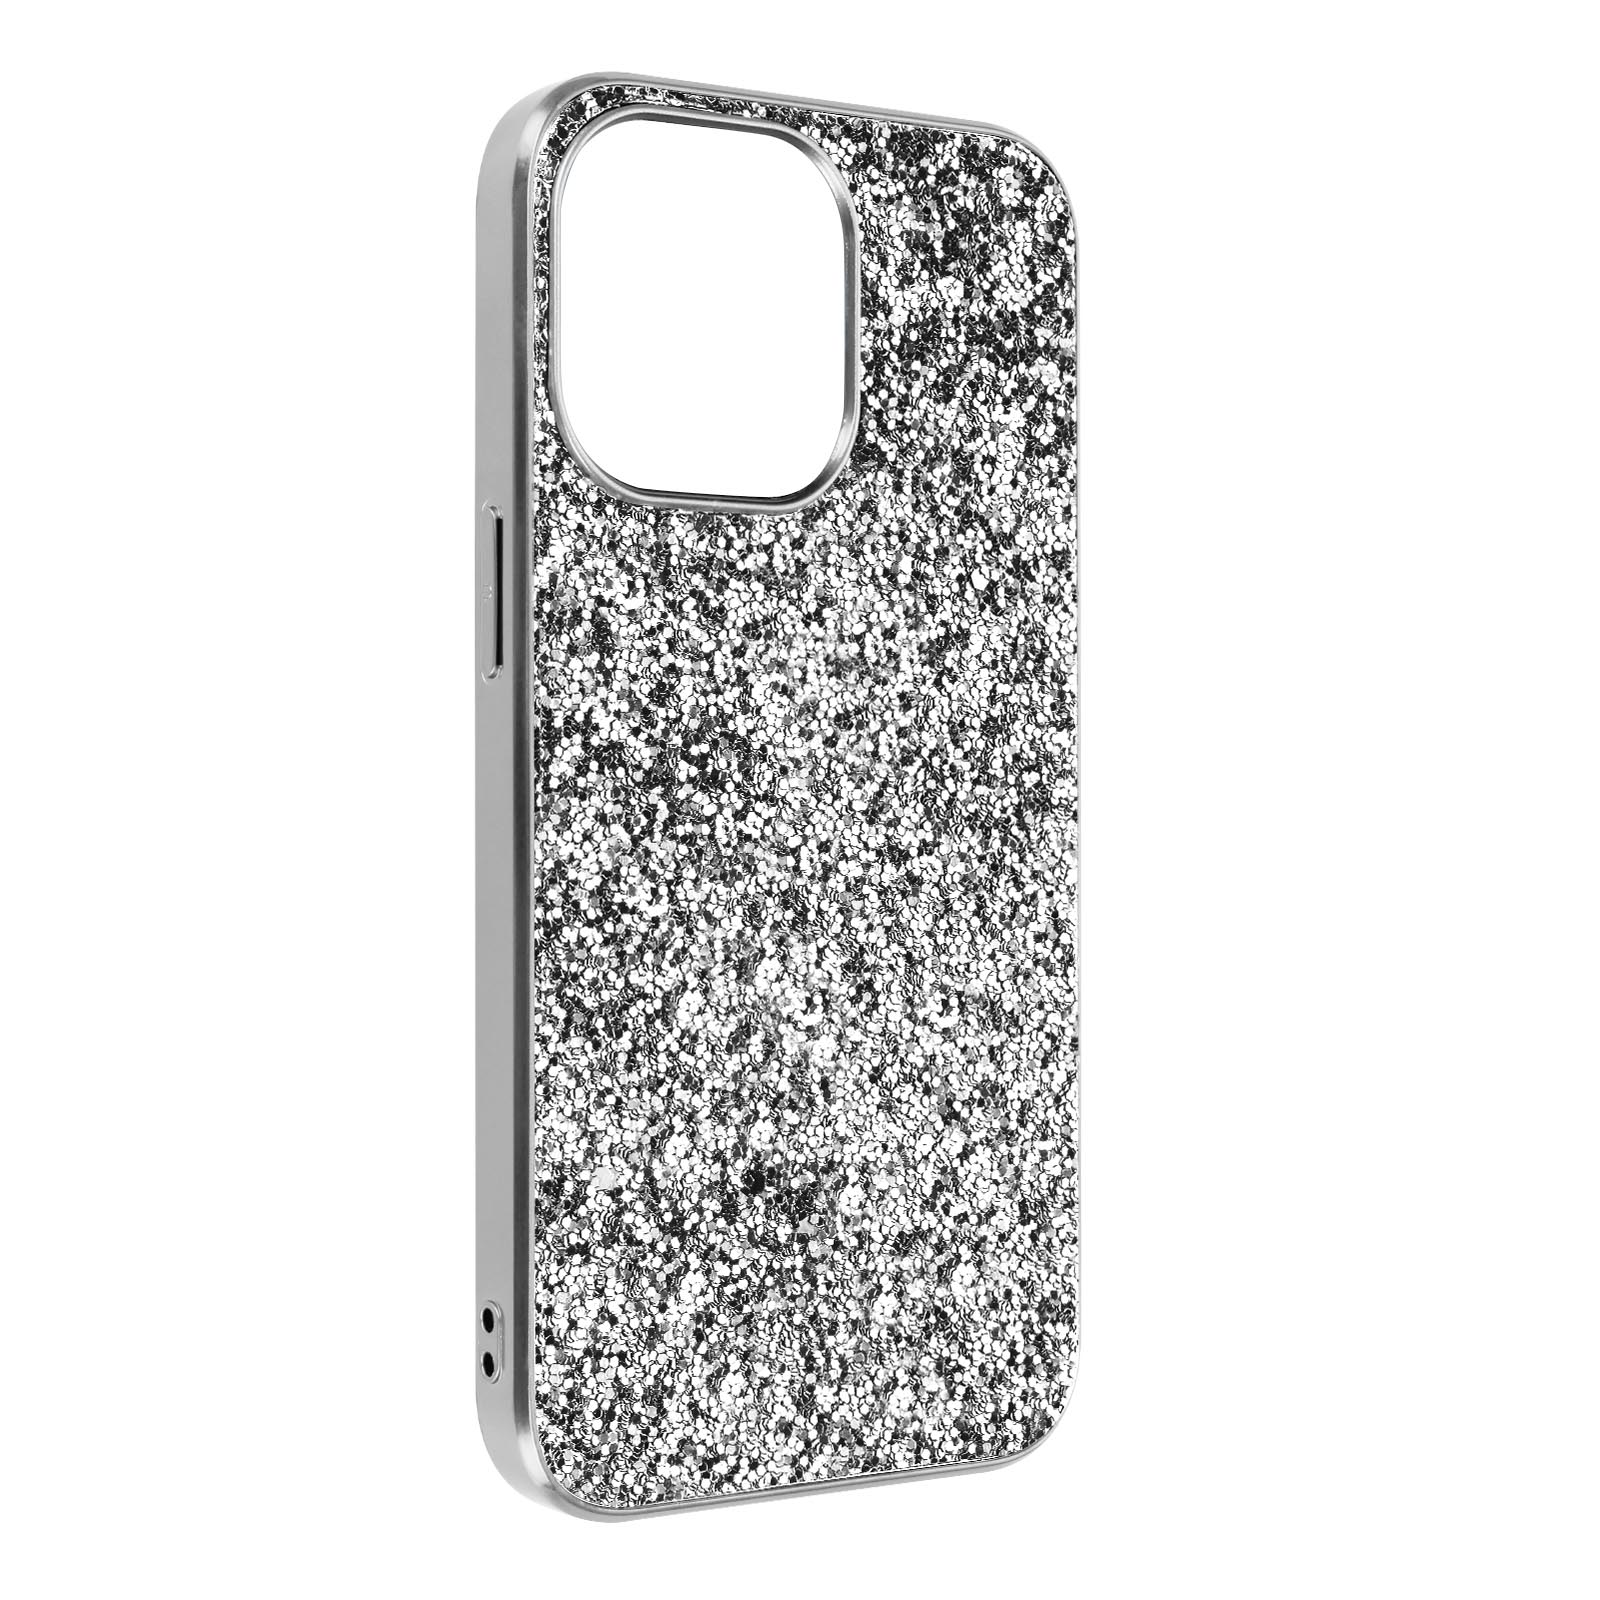 iPhone Powder Series, Backcover, 13 AVIZAR Max, Pro Apple, Silber